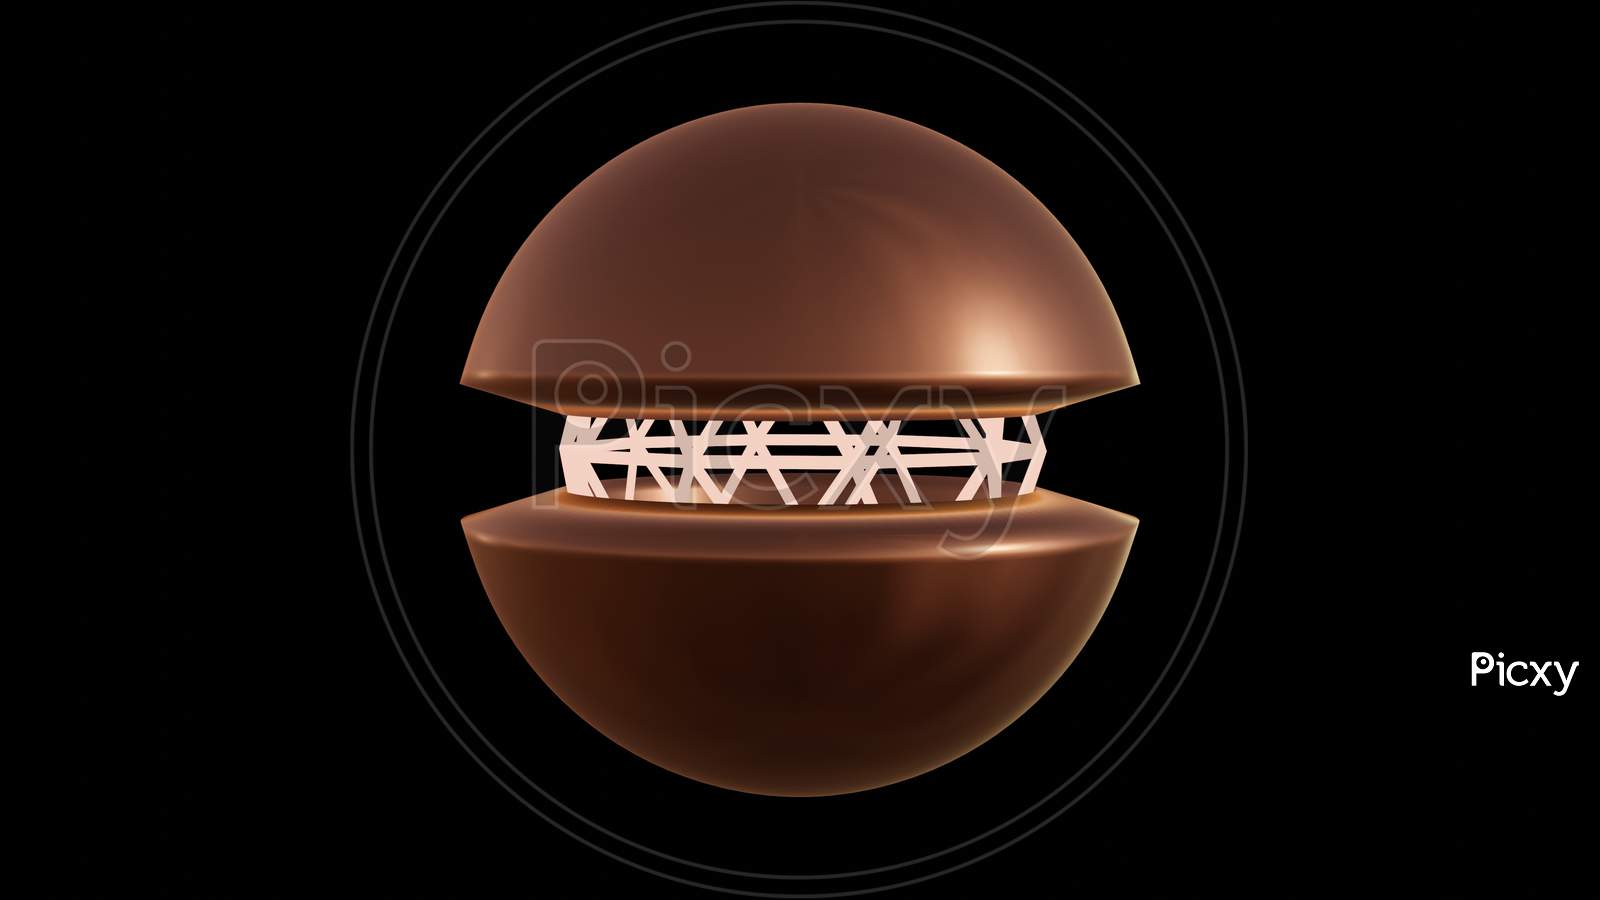 Illustration Graphic Of A Glossy 3D Object With Wire Frame At Center, Isolated On Black Background.